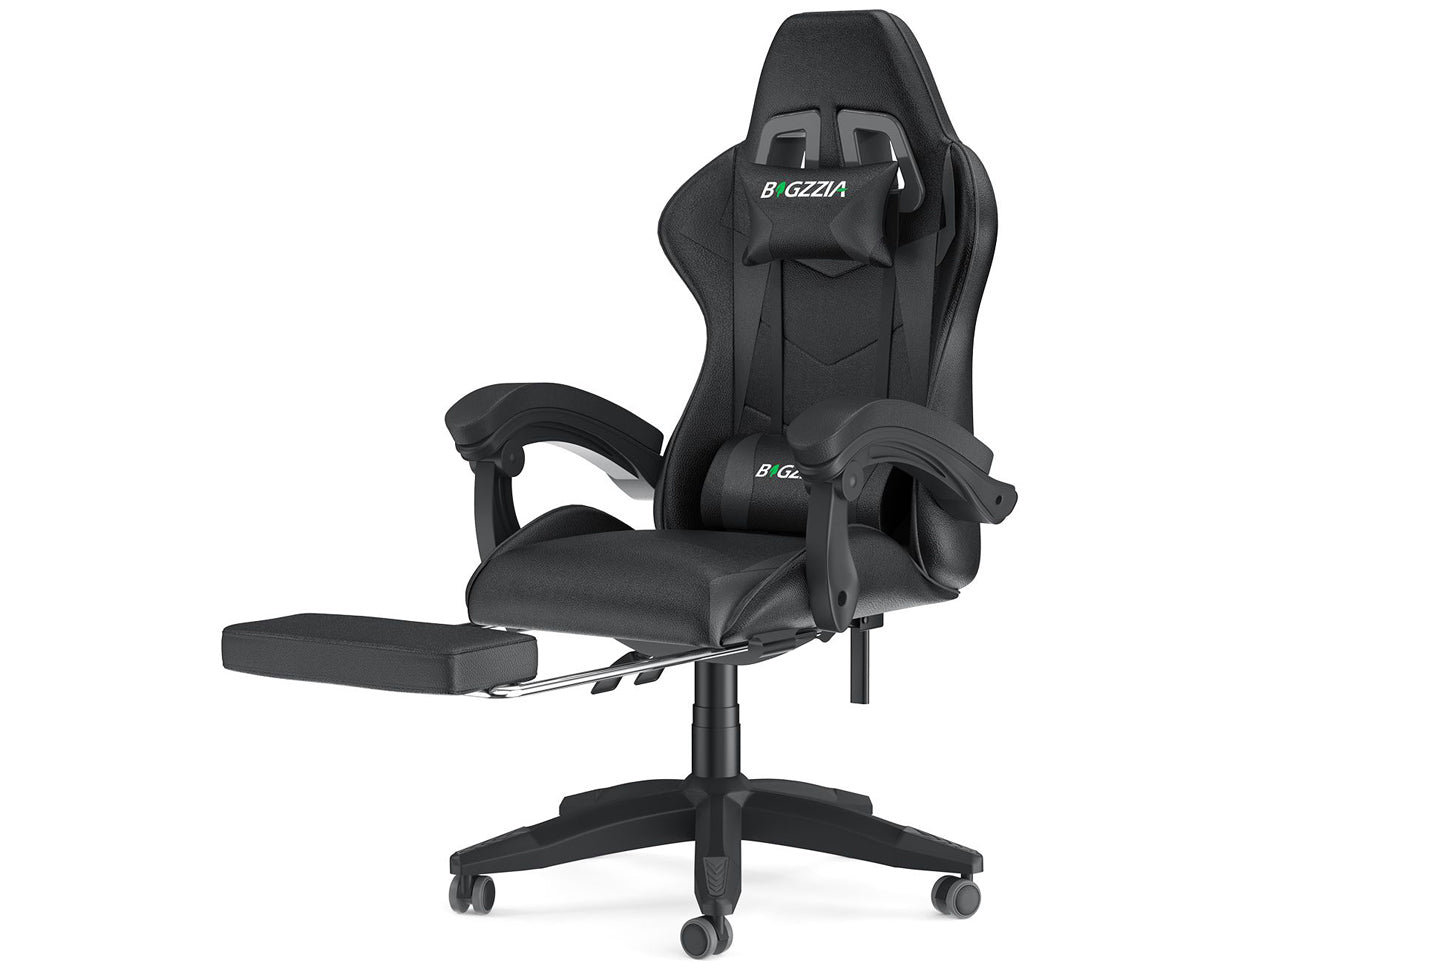 Ergonomic Gaming Chair 155¡ã Reclining Swivel Chair with Headrest Footrest Lumbar Support PU Leather Office Chair Black